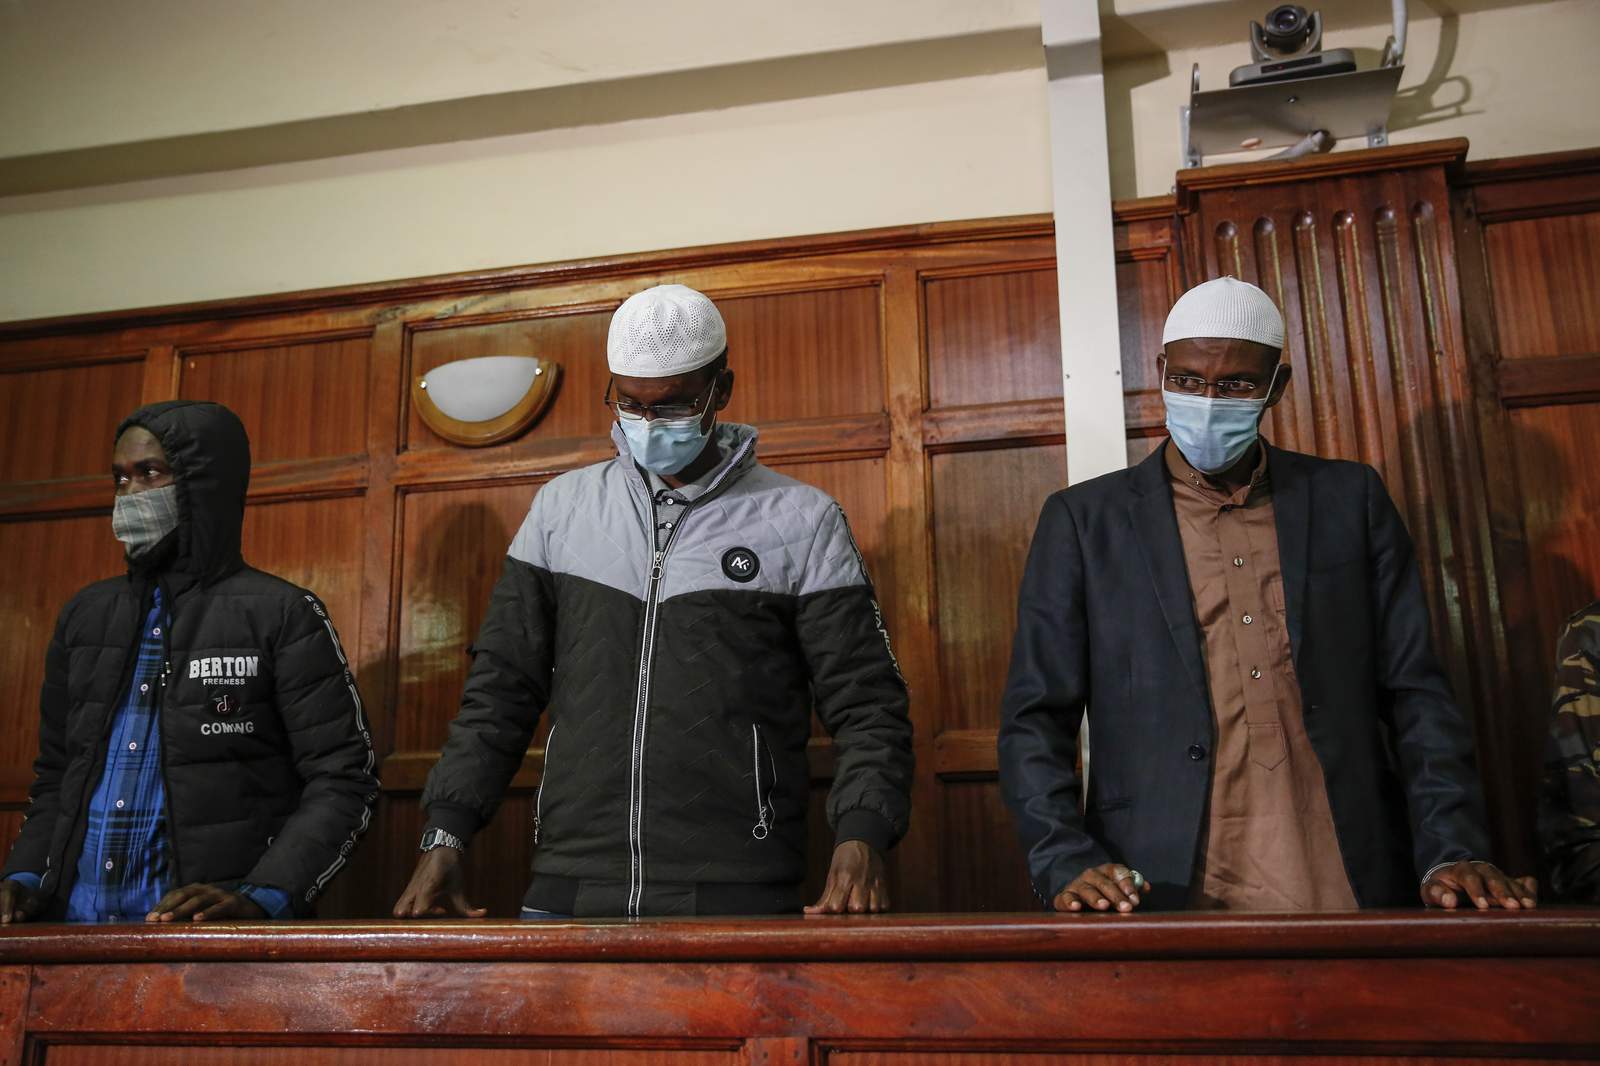 2 guilty of supporting deadly Westgate mall attack in Kenya